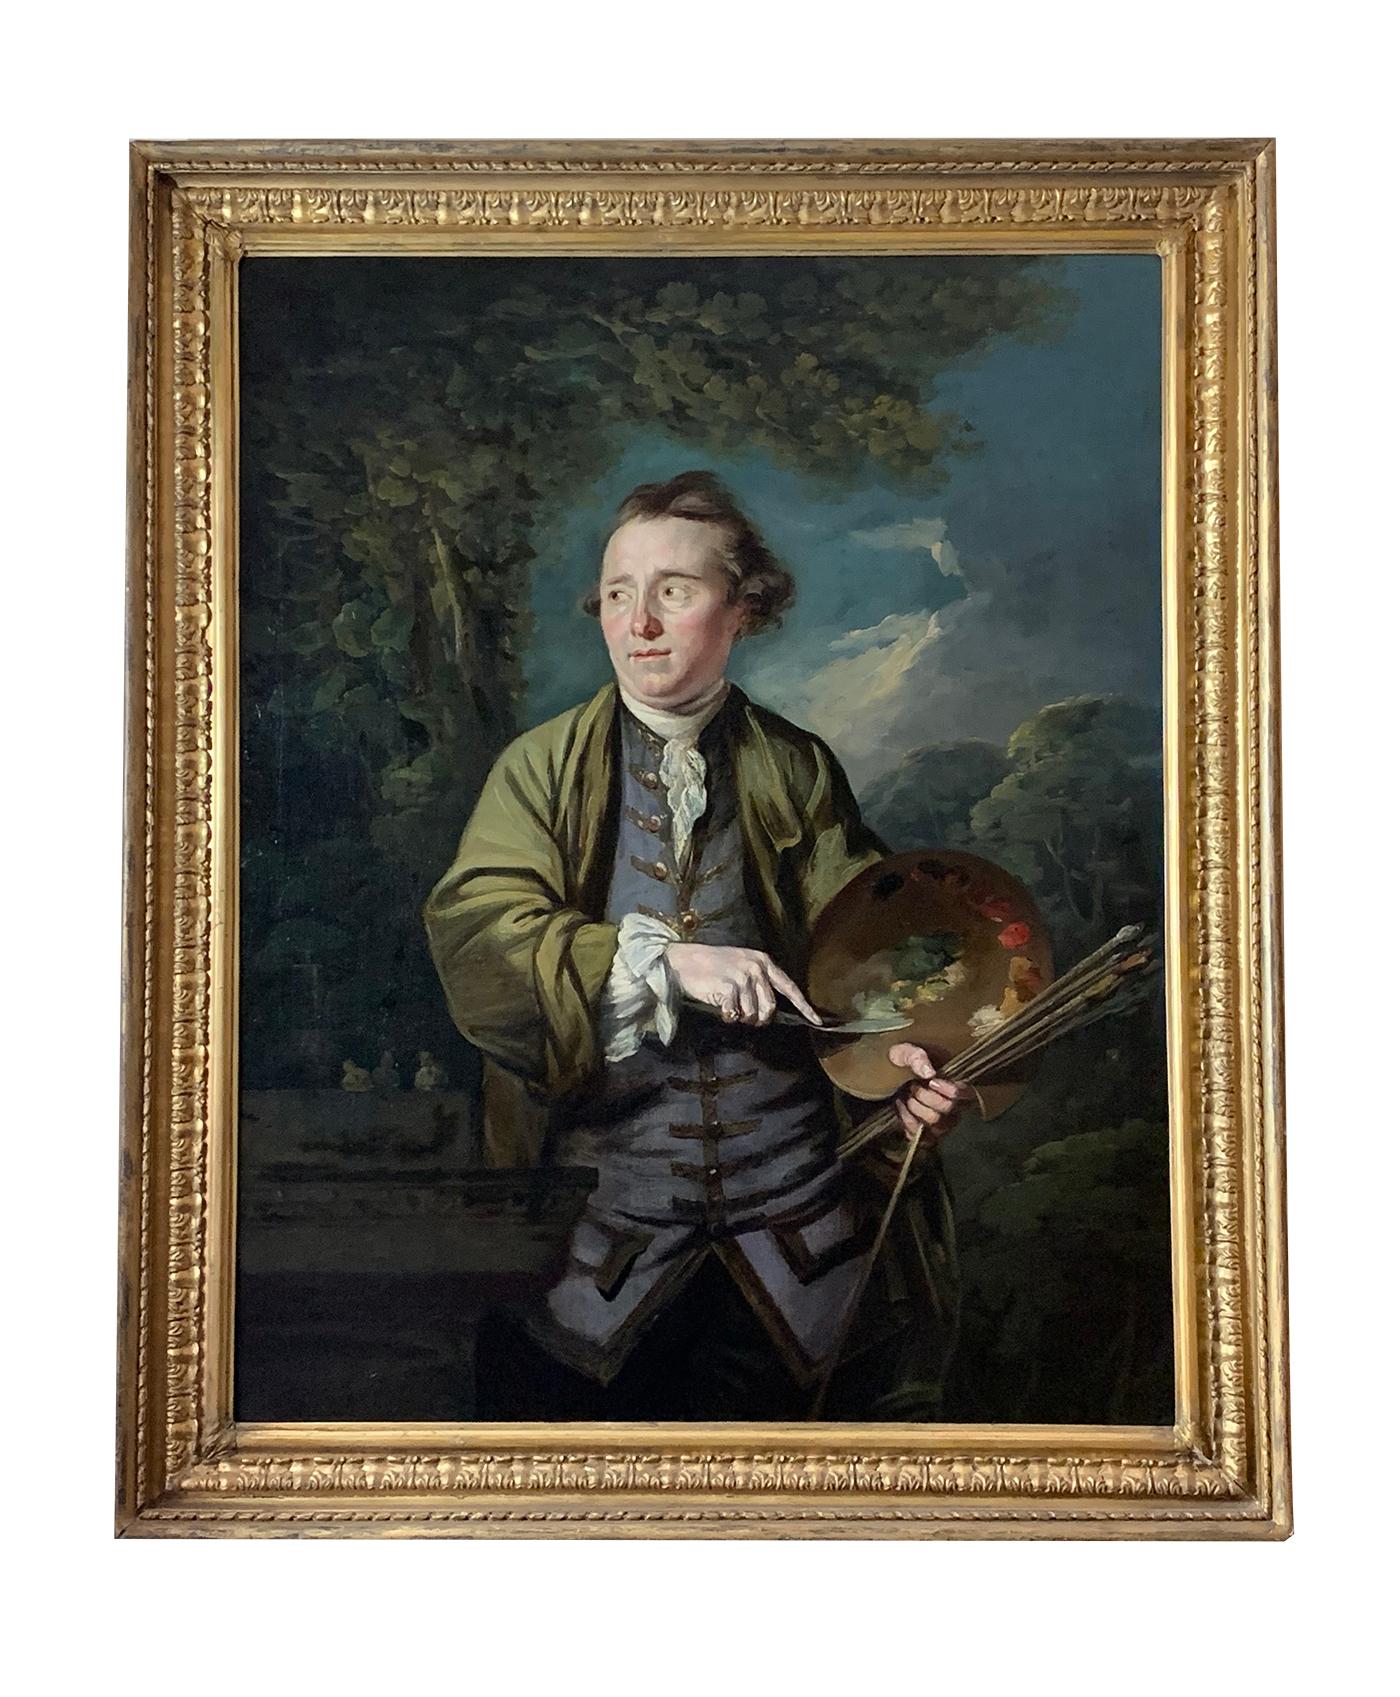 Attributed to James Northcote  Portrait Painting - 18th Century English Romantic School Portrait of an Artist in a Green Jacket.